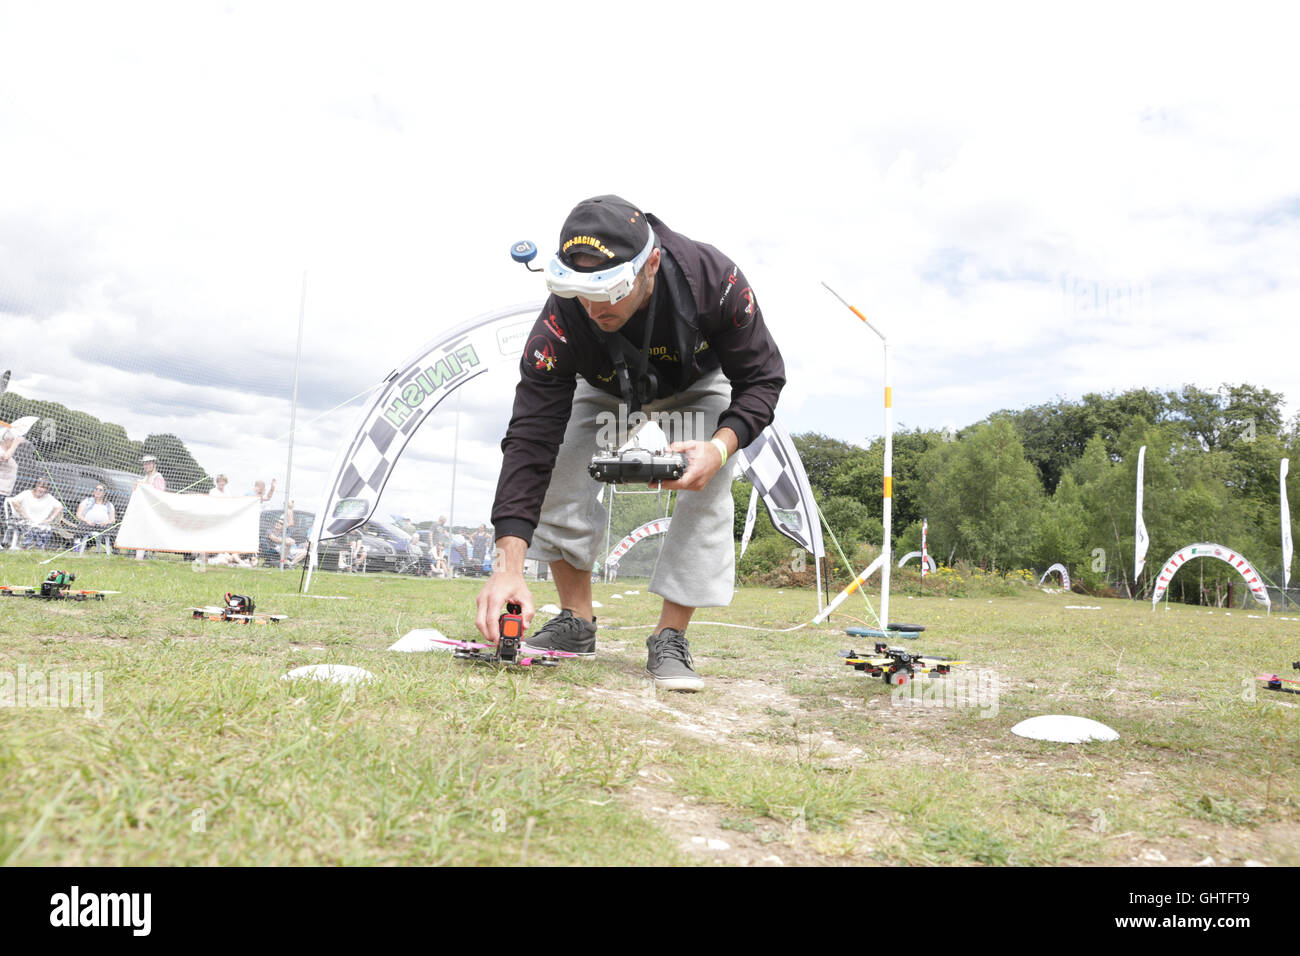 Drone Racing Queen's Cup 2016.  Gary Kent places a drone at thestart line prior to a race. prior to racing. Stock Photo